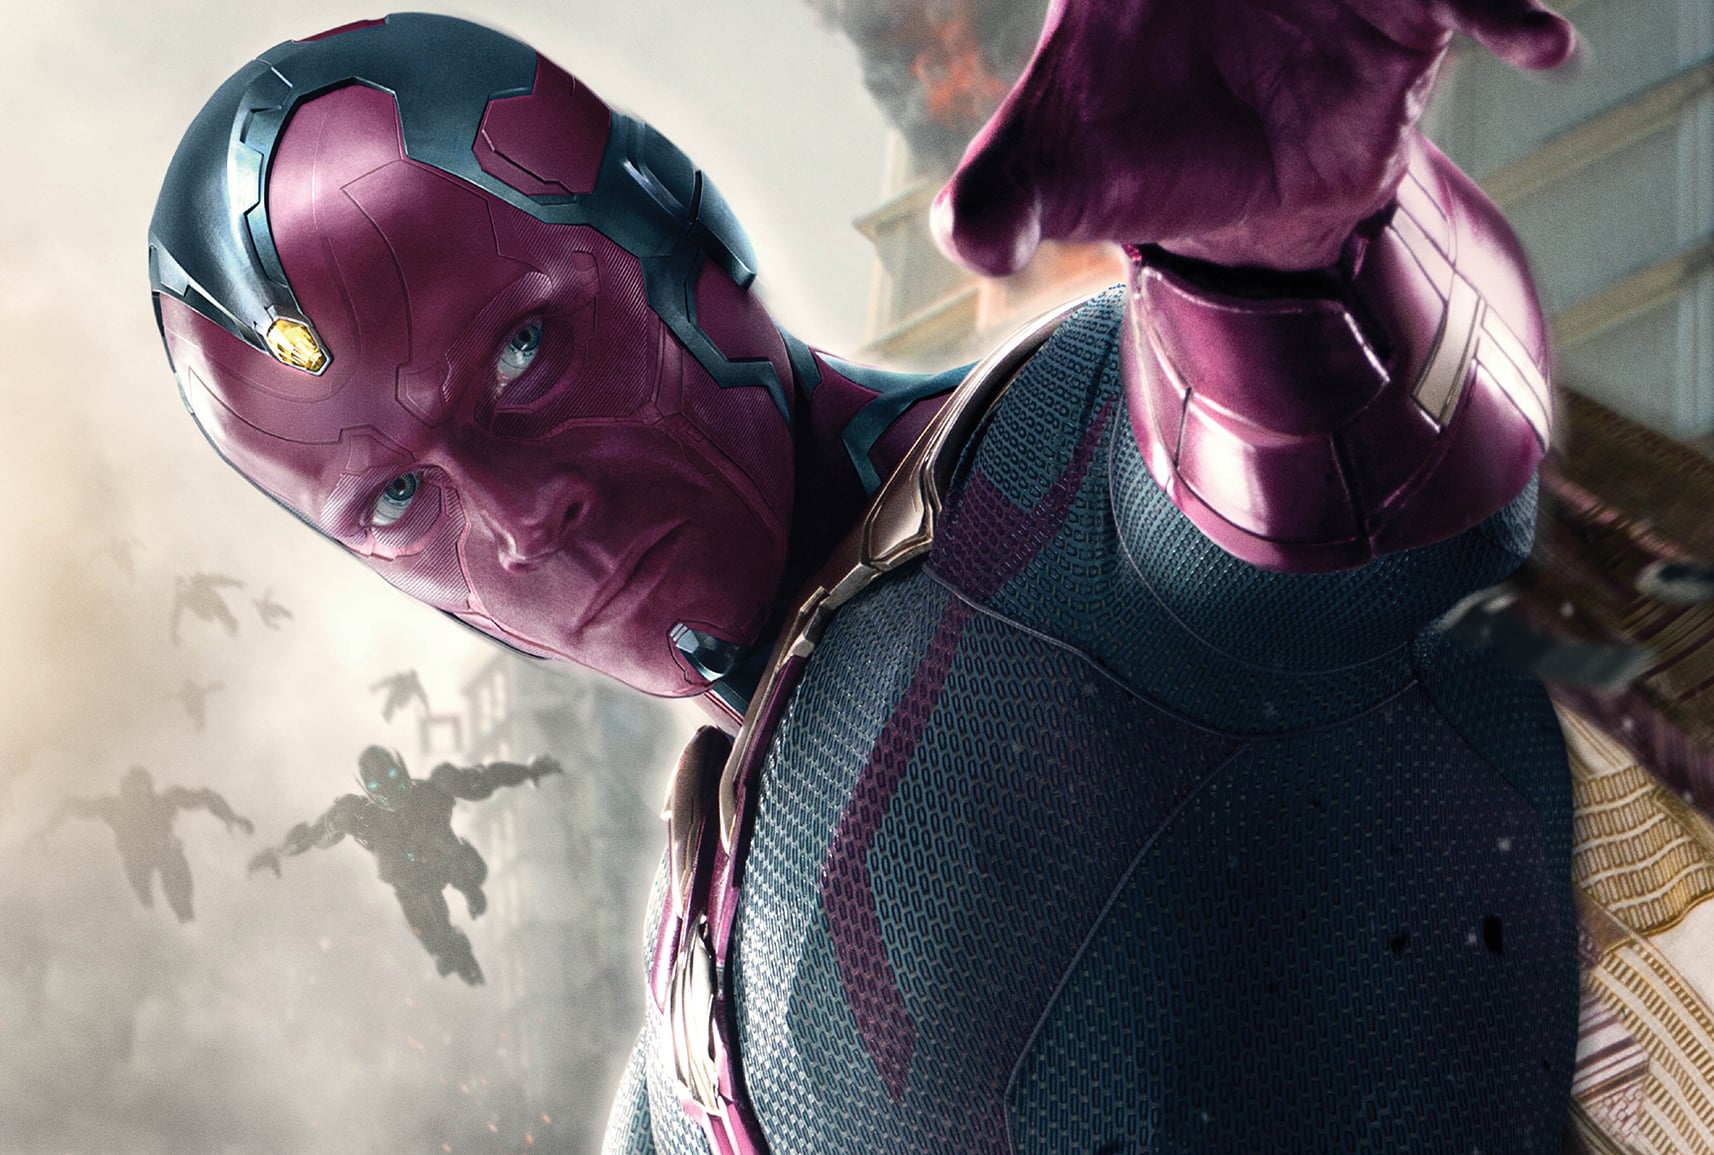 Who Is Vision From The Avengers? | POPSUGAR Entertainment